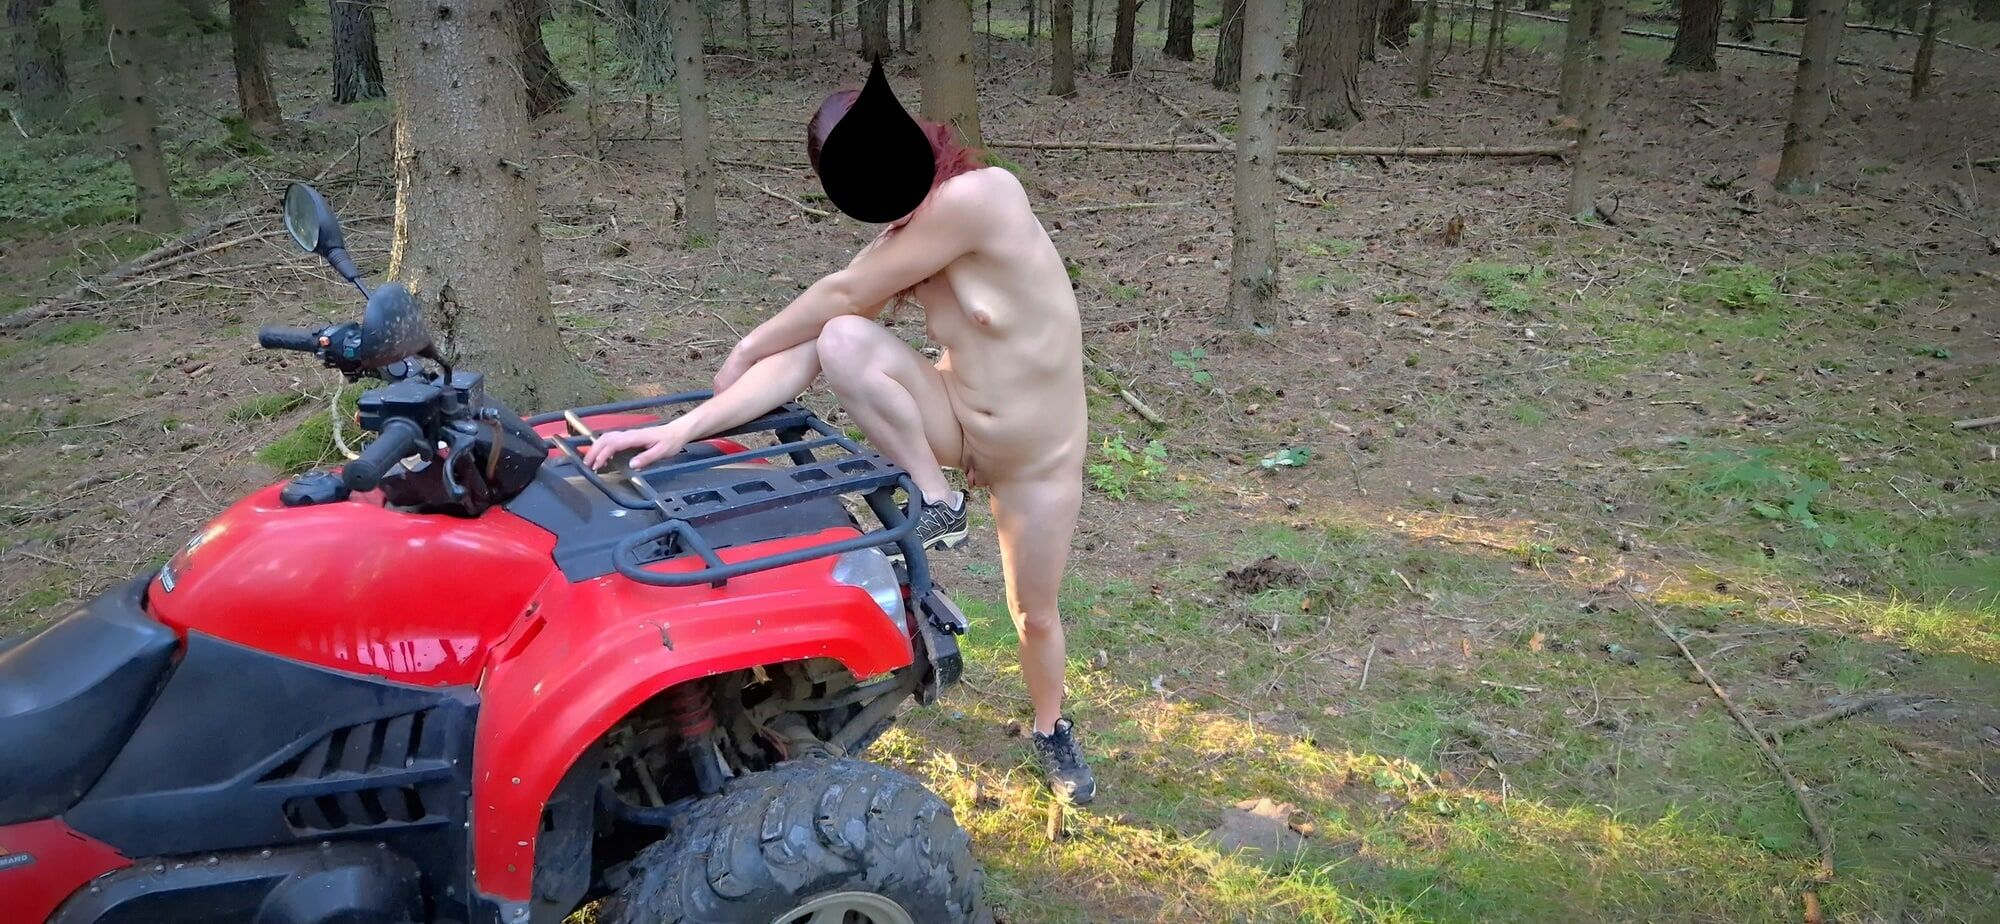  Take pictures and have sex in the forest on a quad bike #36